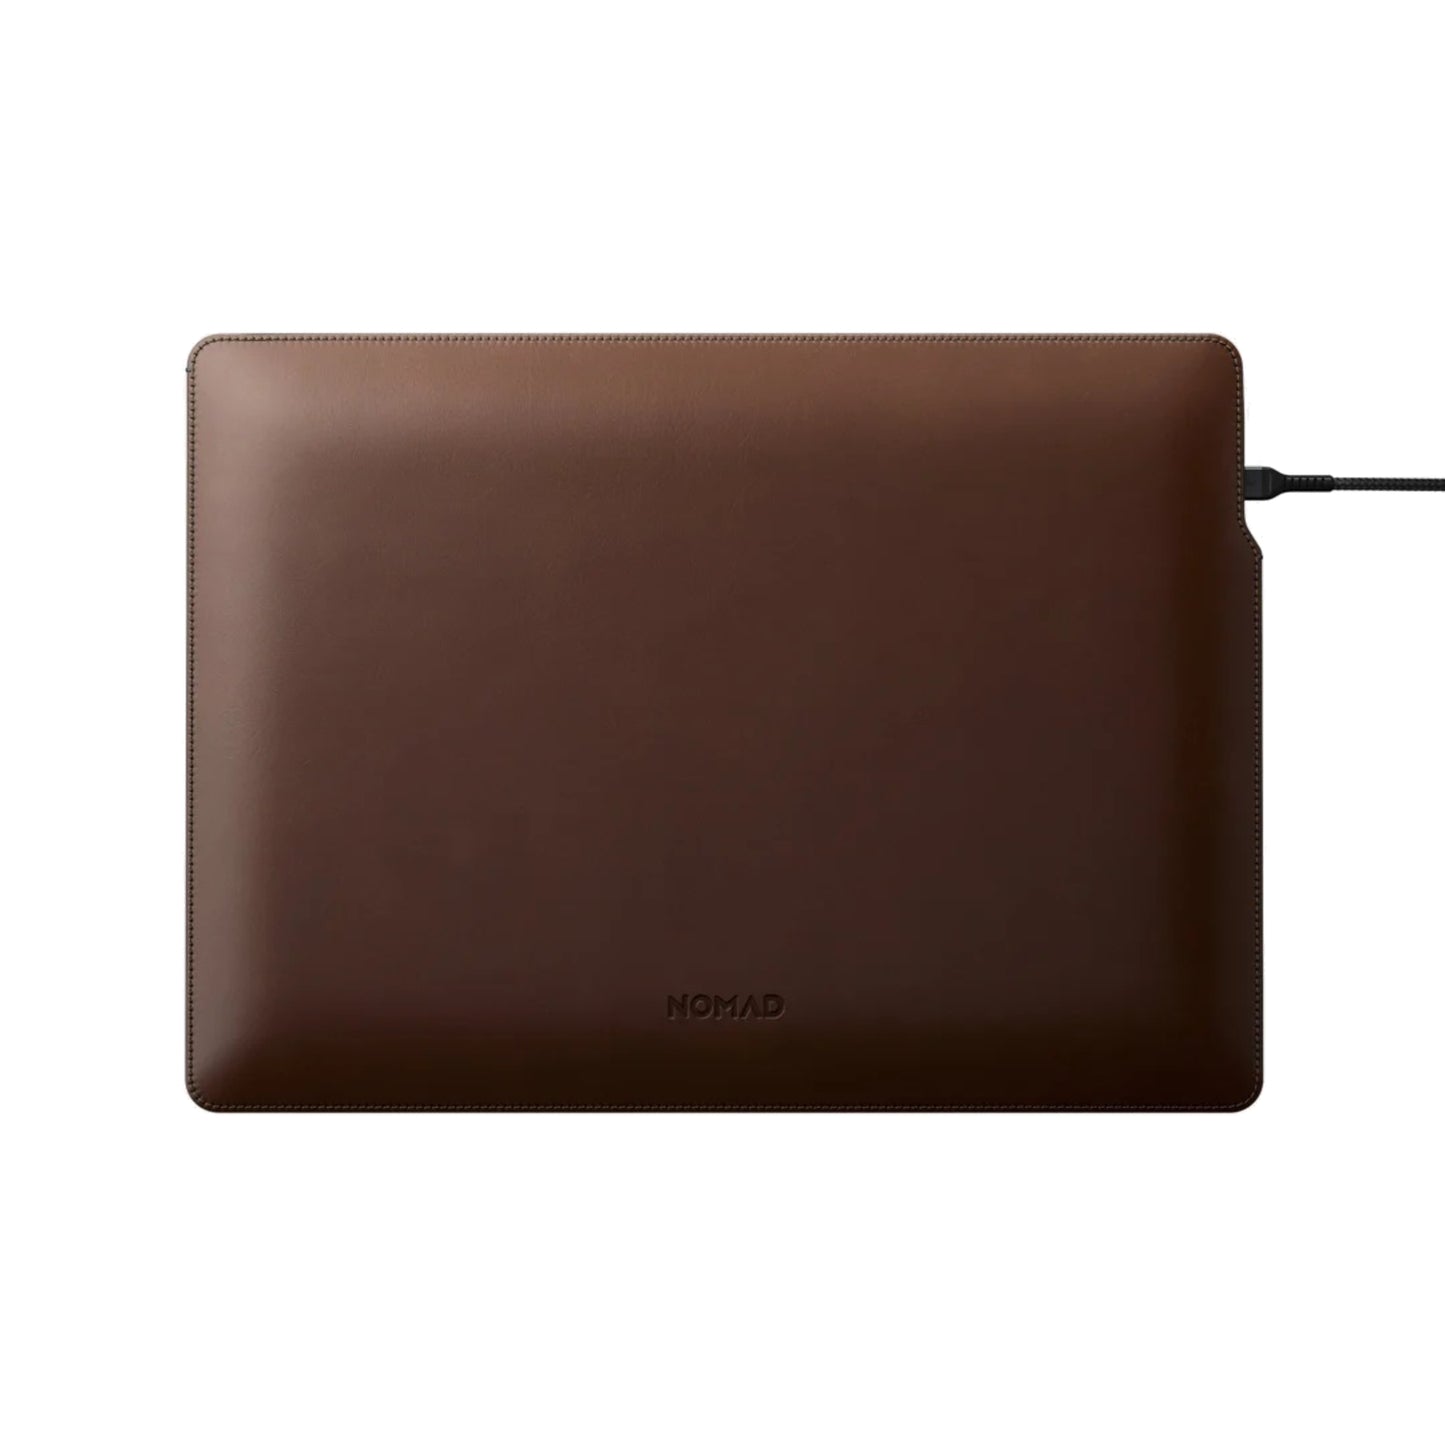 Nomad Horween Leather Sleeve for MacBook Pro / MacBook Air